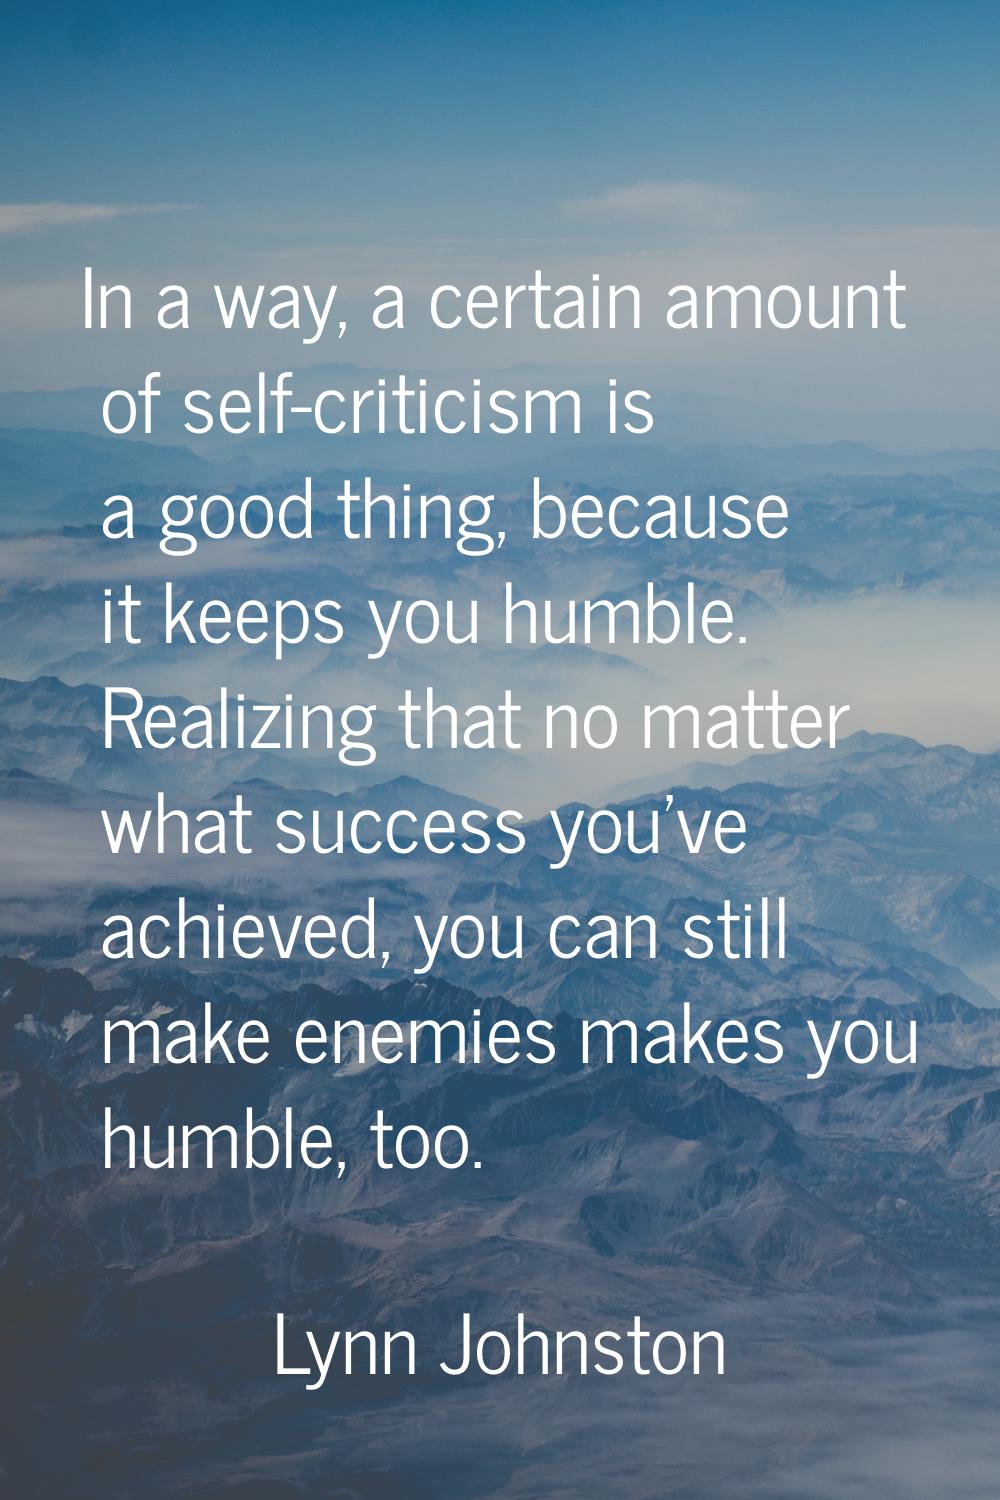 In a way, a certain amount of self-criticism is a good thing, because it keeps you humble. Realizin